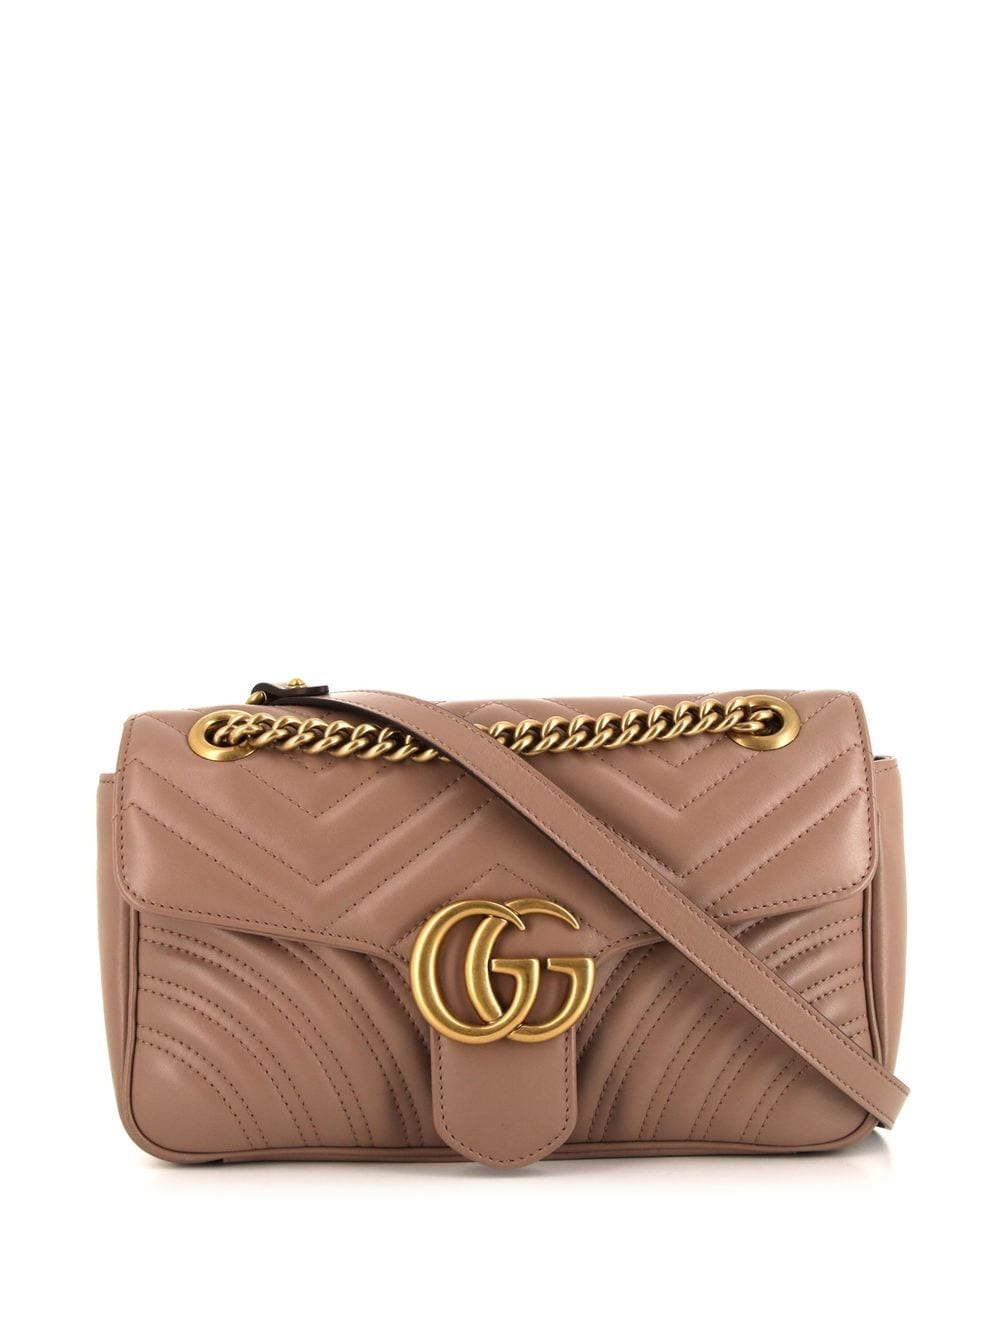 Gucci GG Marmont Mini Leather Cross Body Bag, Leather Bag, Beige